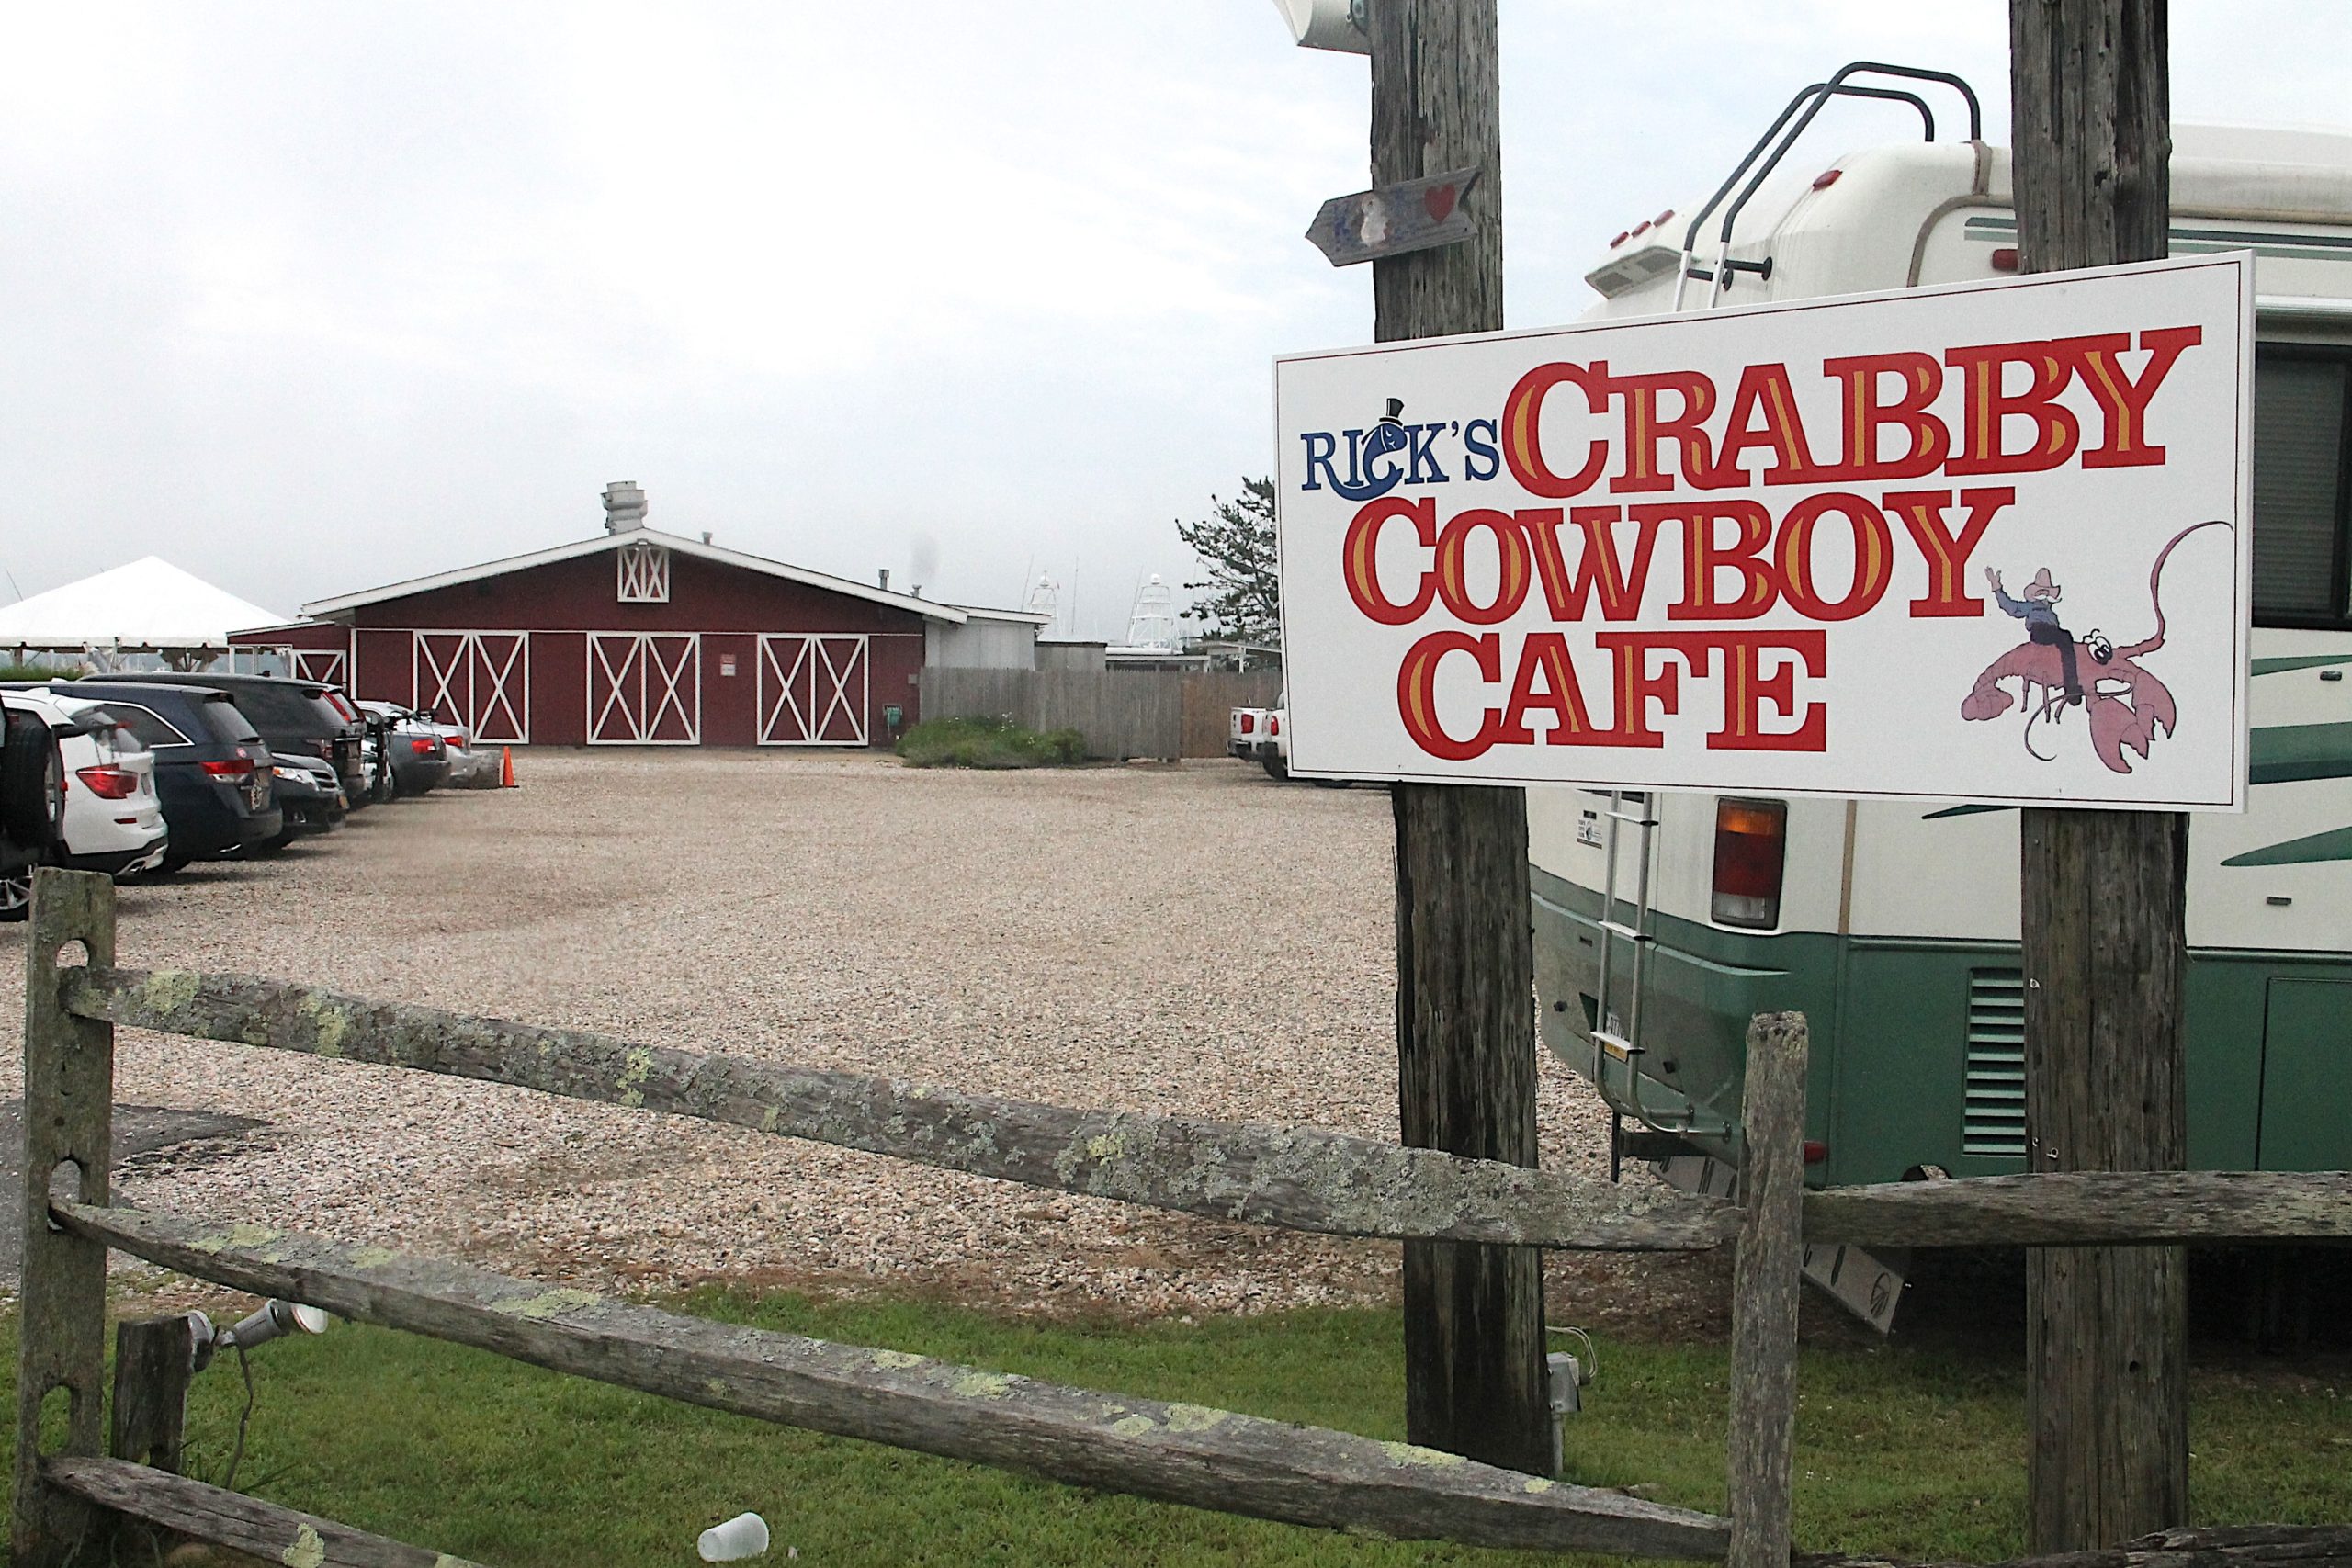 Rick’s Crabby Cowboy Cafe in Montauk was purchased recently by Jeremy Morton, who also recently purchased another popular business, Ruschmeyer’s.             EXPRESS FILE